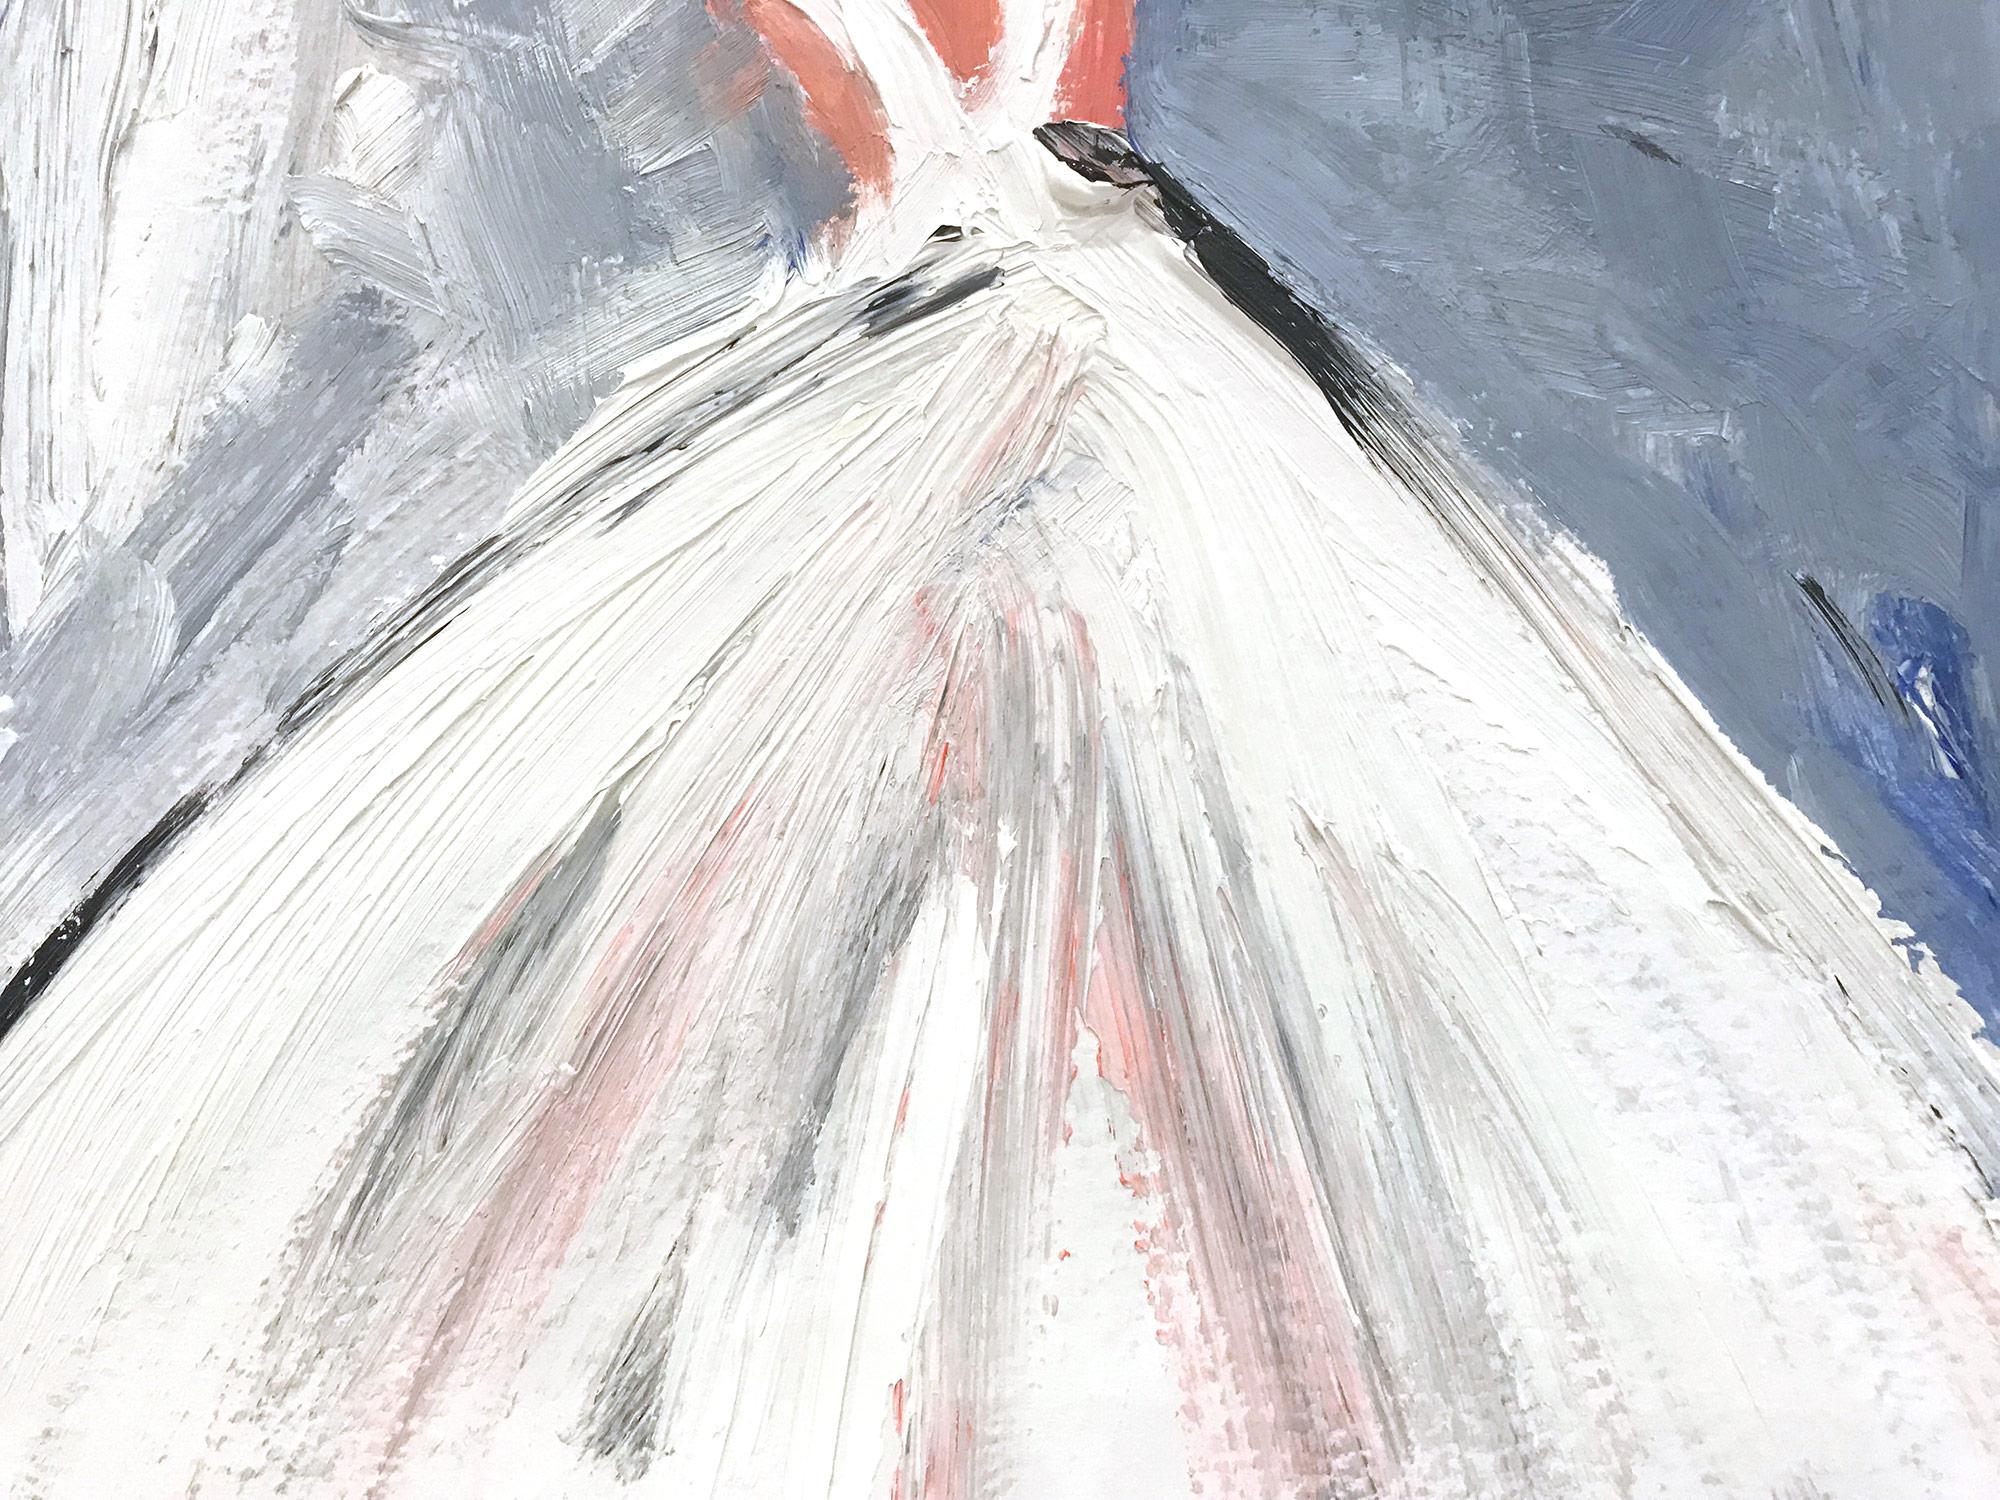 A very whimsical depiction of a woman standing gracefully in a white gown against a periwinkle blue background. This piece captures the essence of fashion in Pairs. Done in a very modern and impressionistic style, the colors are bright yet subtle.